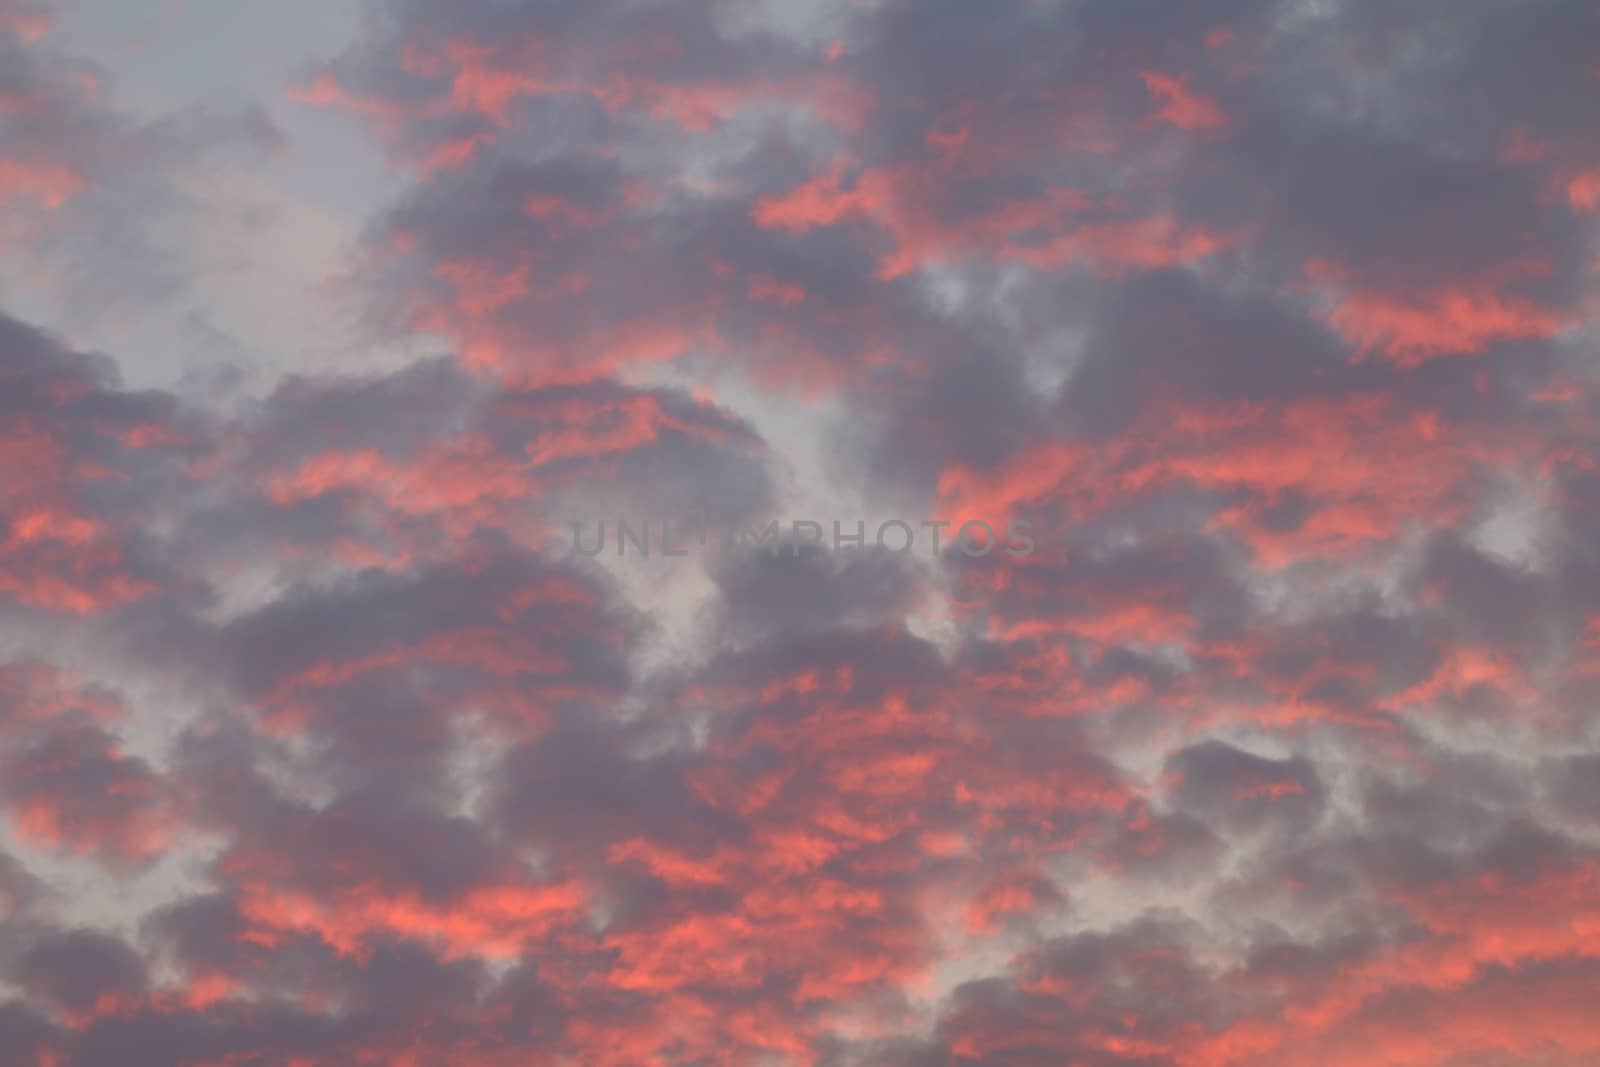 dramatic red sky cloud, red sky at sunset, red sky sunlight background, pollution sky clouds natural disasters global warming